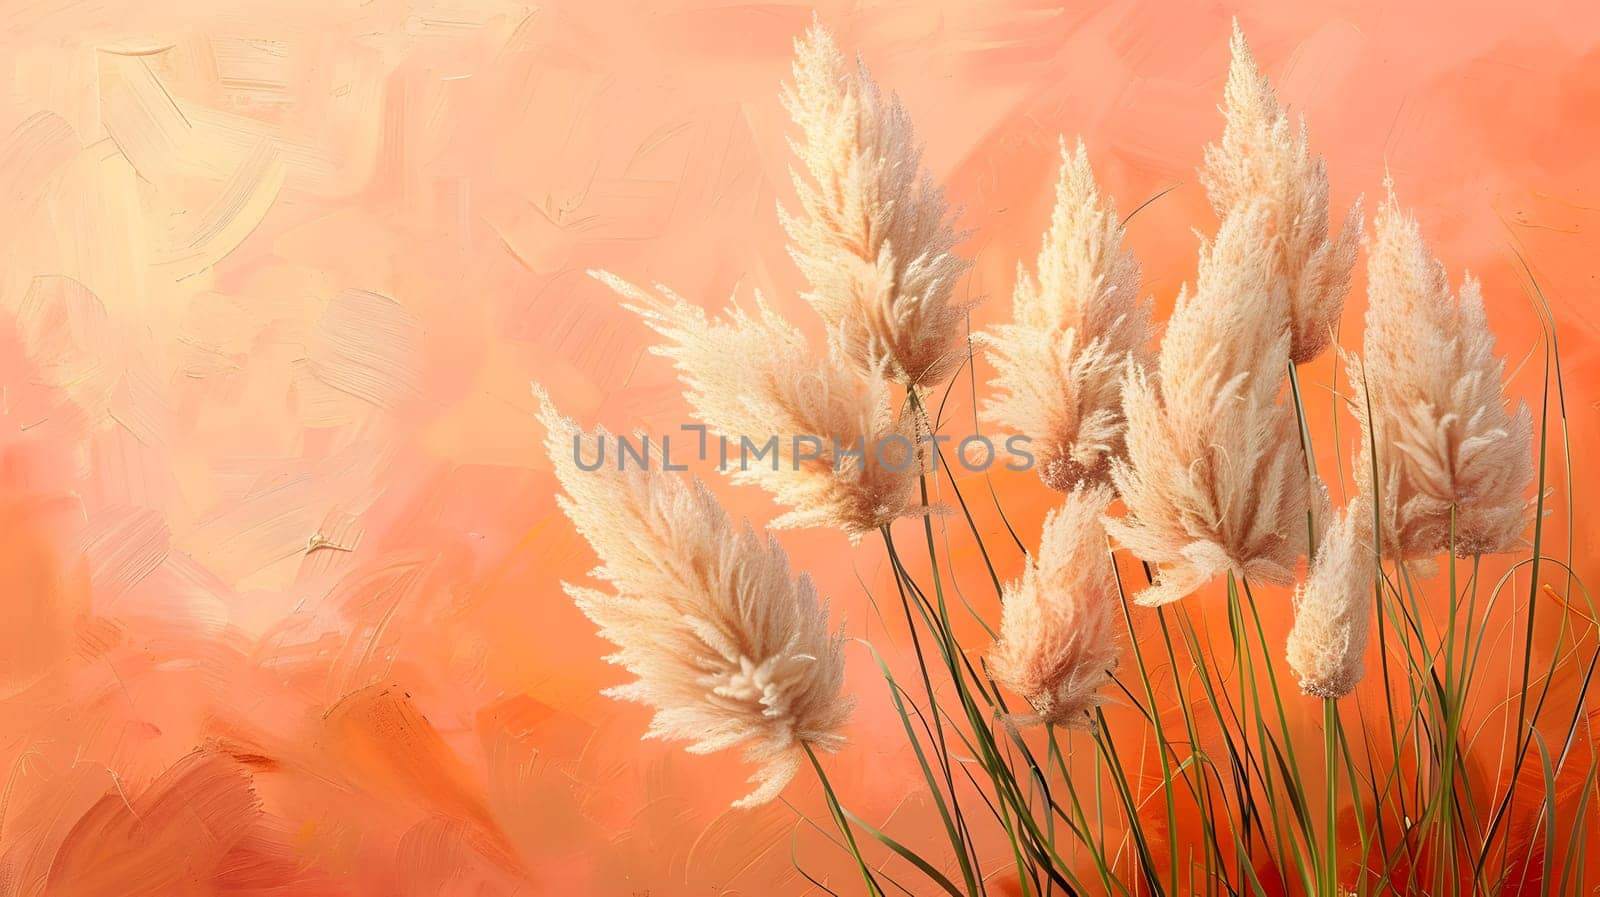 Tall peach grass in natural landscape art with flowers by Nadtochiy